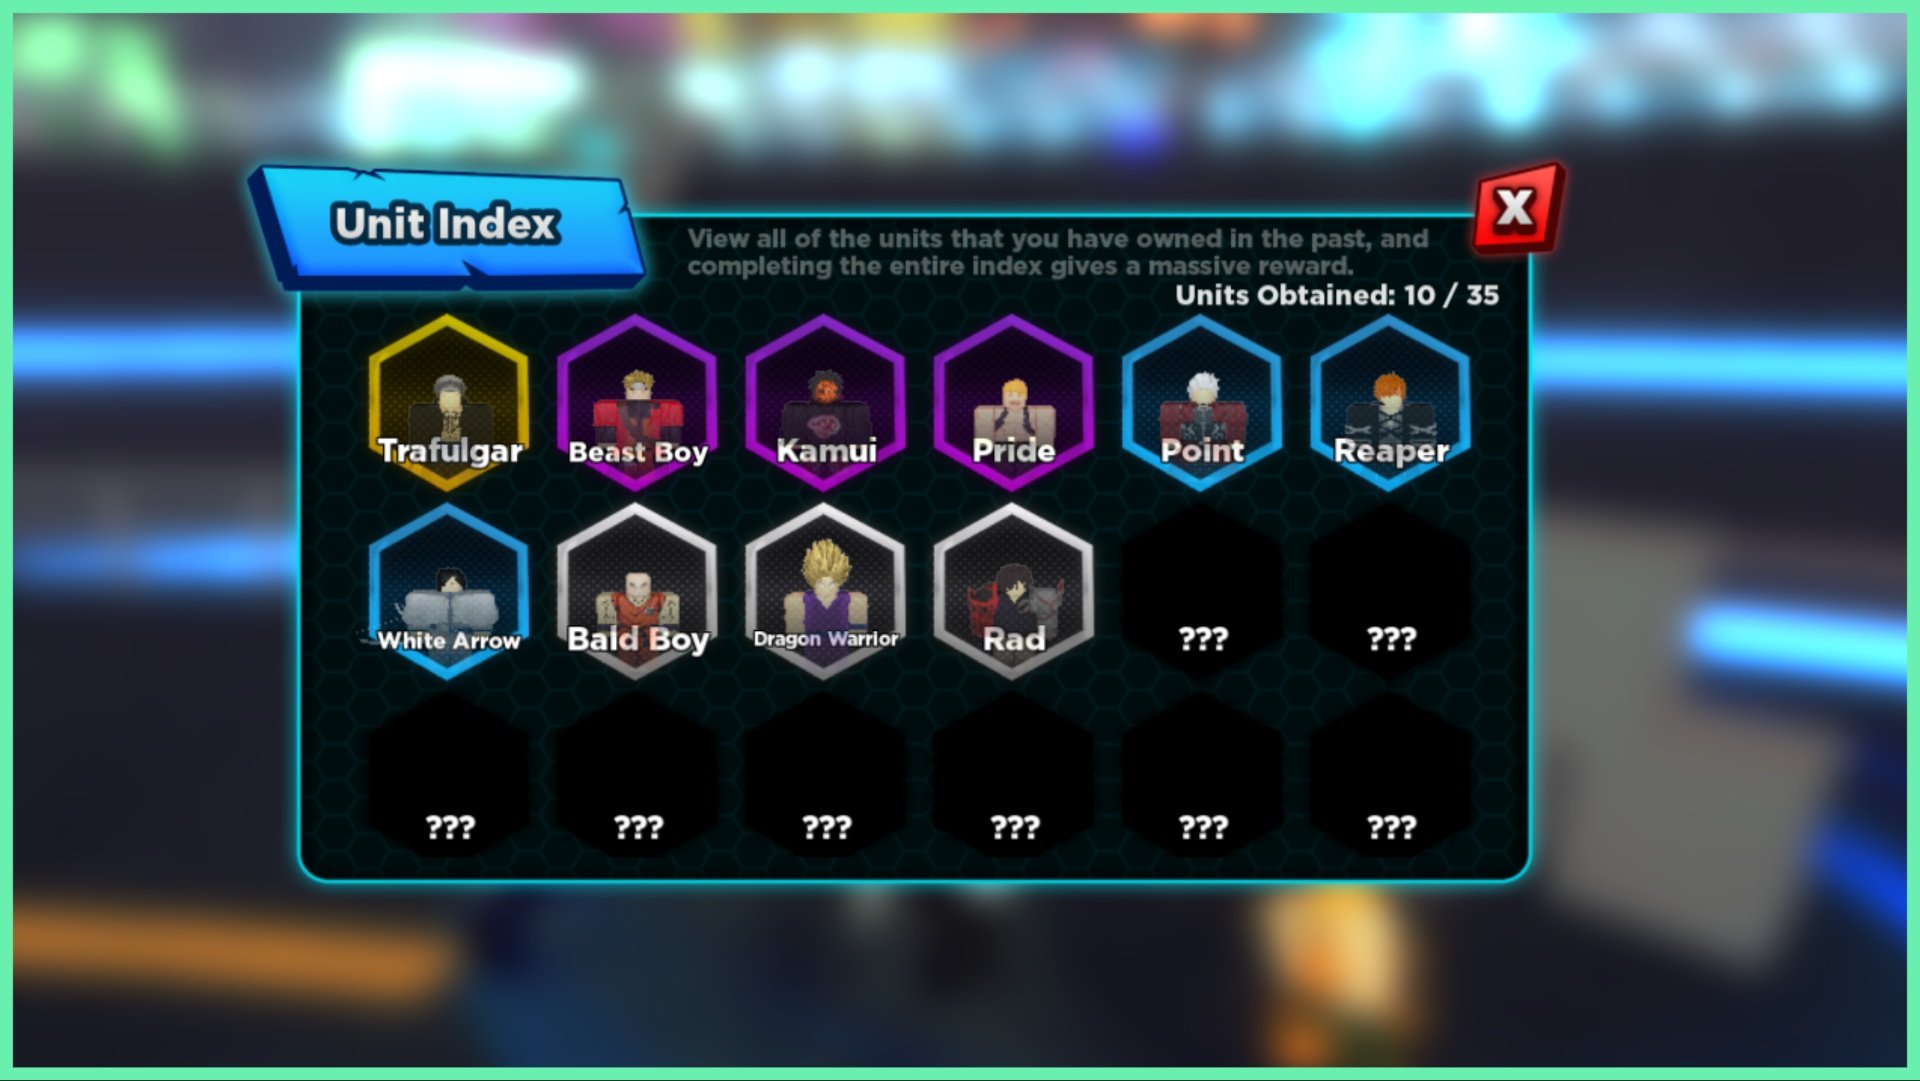 The image shows the index popup from within the game which showcases icons of each unit collected so far against a dark black tech-style background.